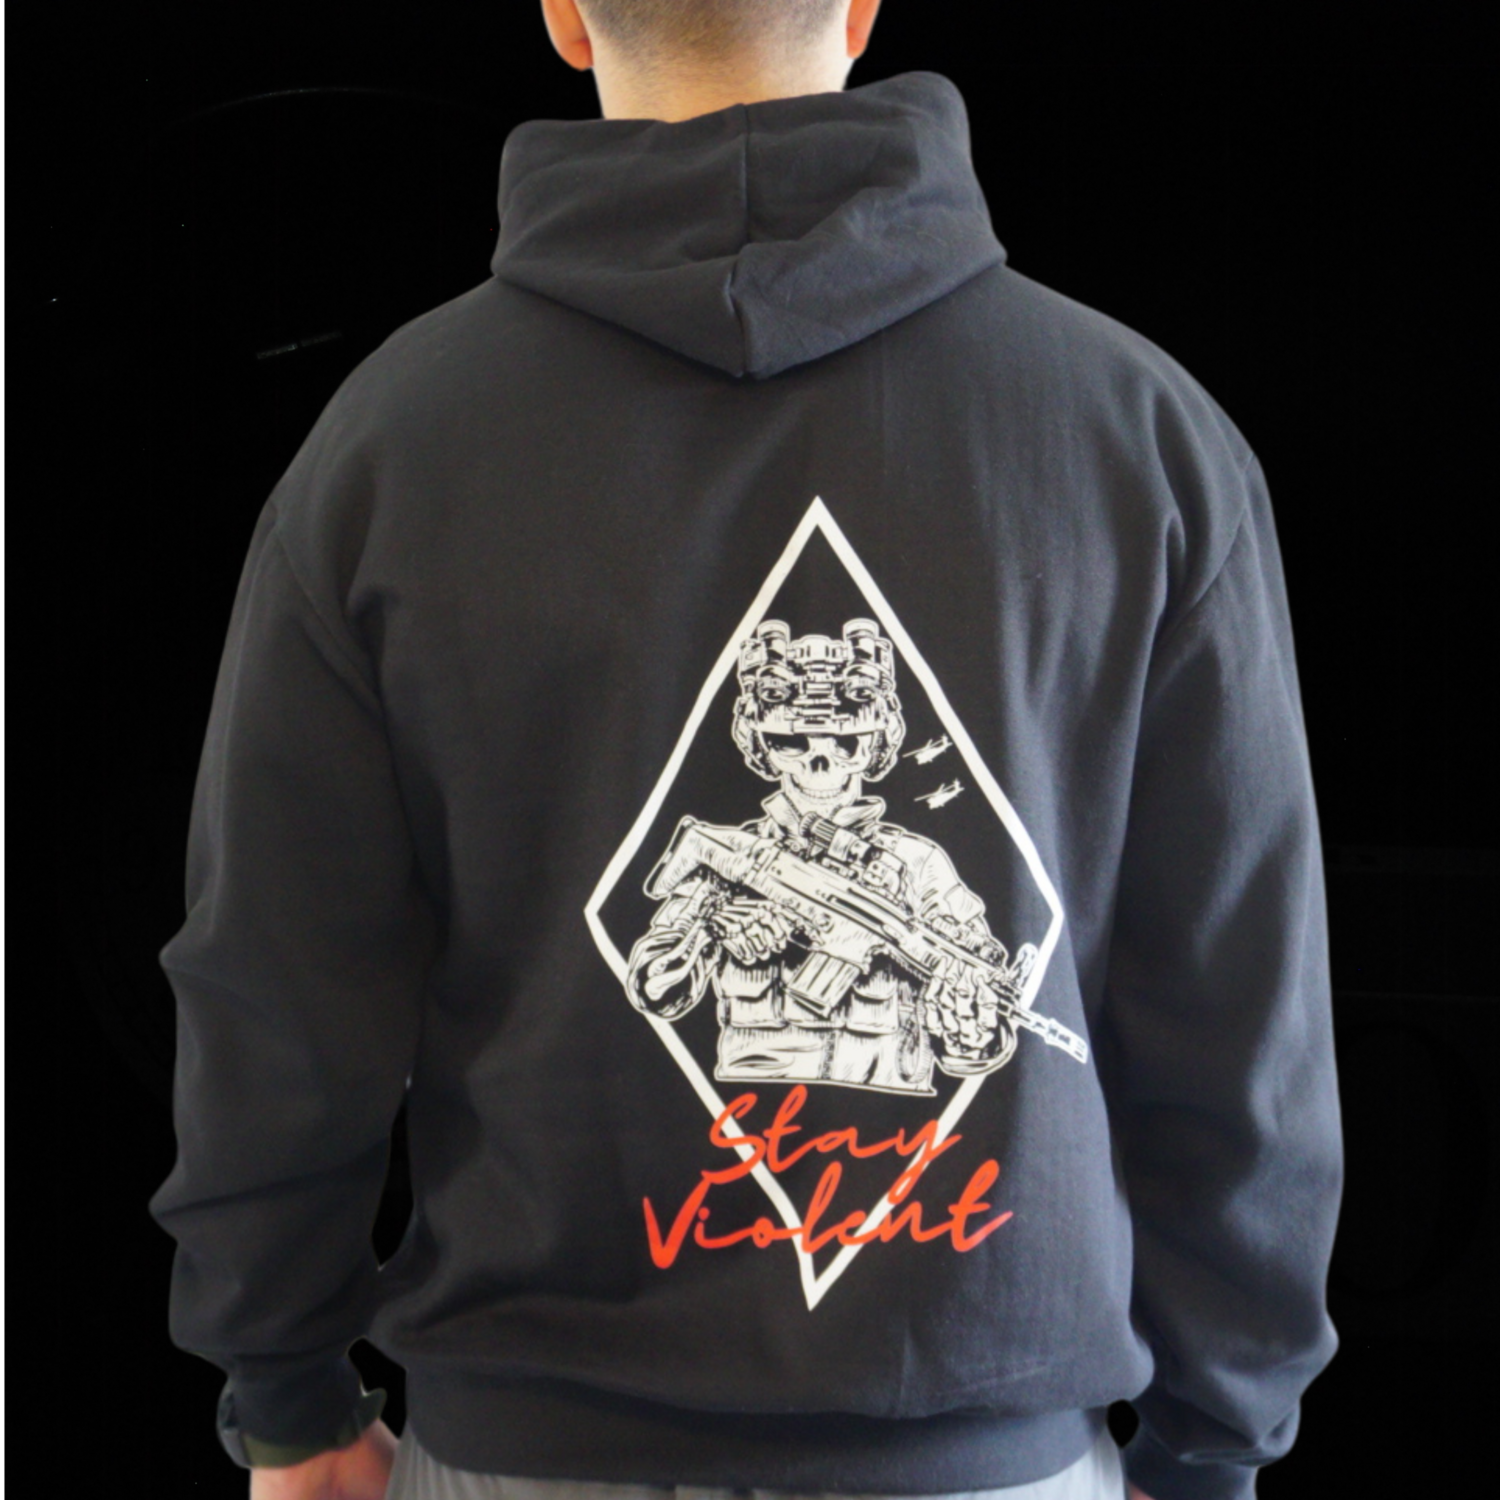 Stay Violent Hoodie (small)